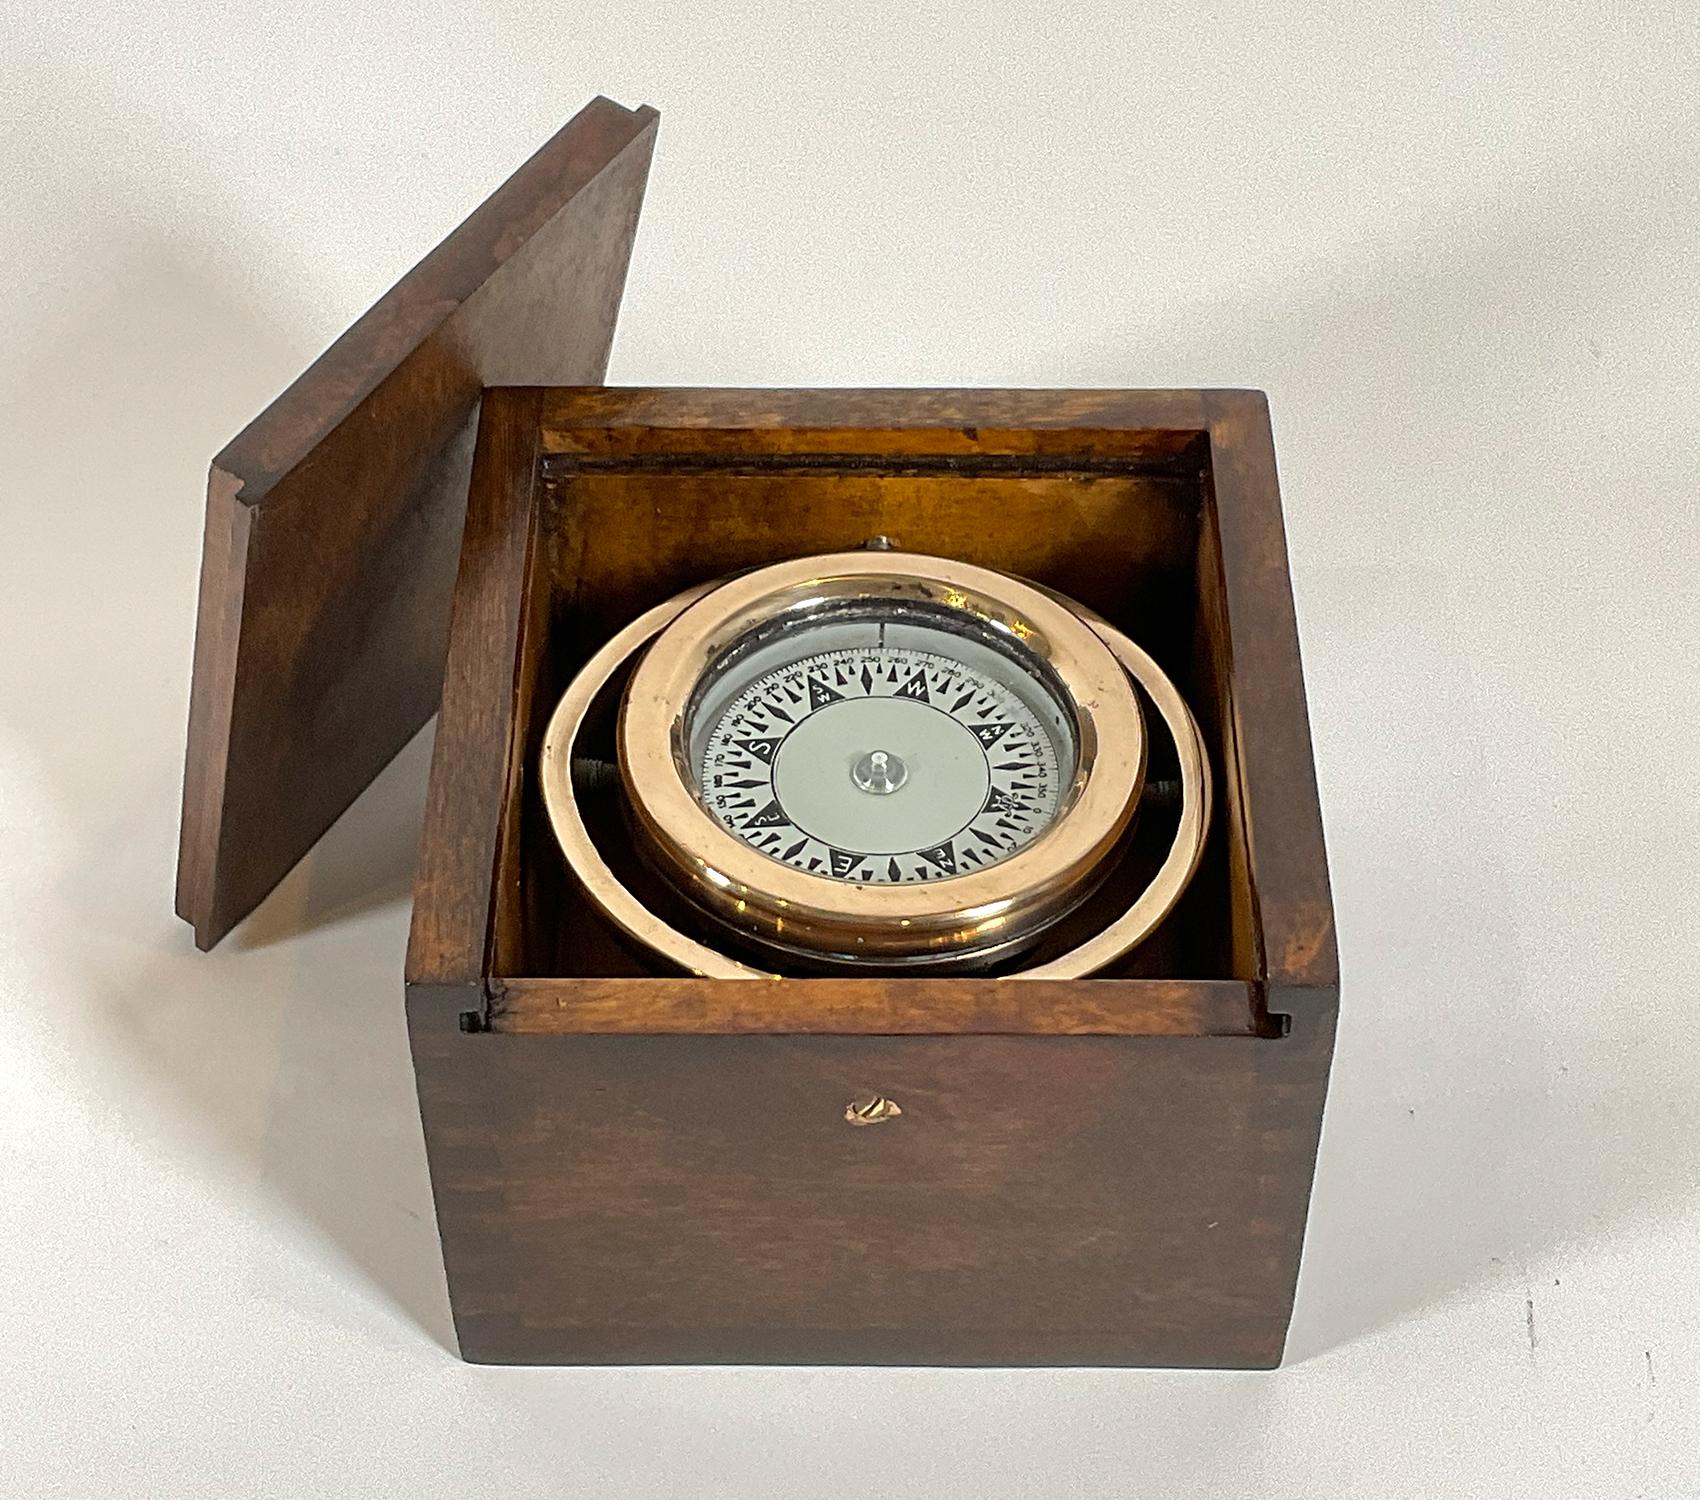 This classic marine instrument was made by Wilcox Crittendon of Middletown Connecticut. Solid brass marine compass fitted to a varnished wood box.

Weight: 2 LBS
Overall dimensions: 3